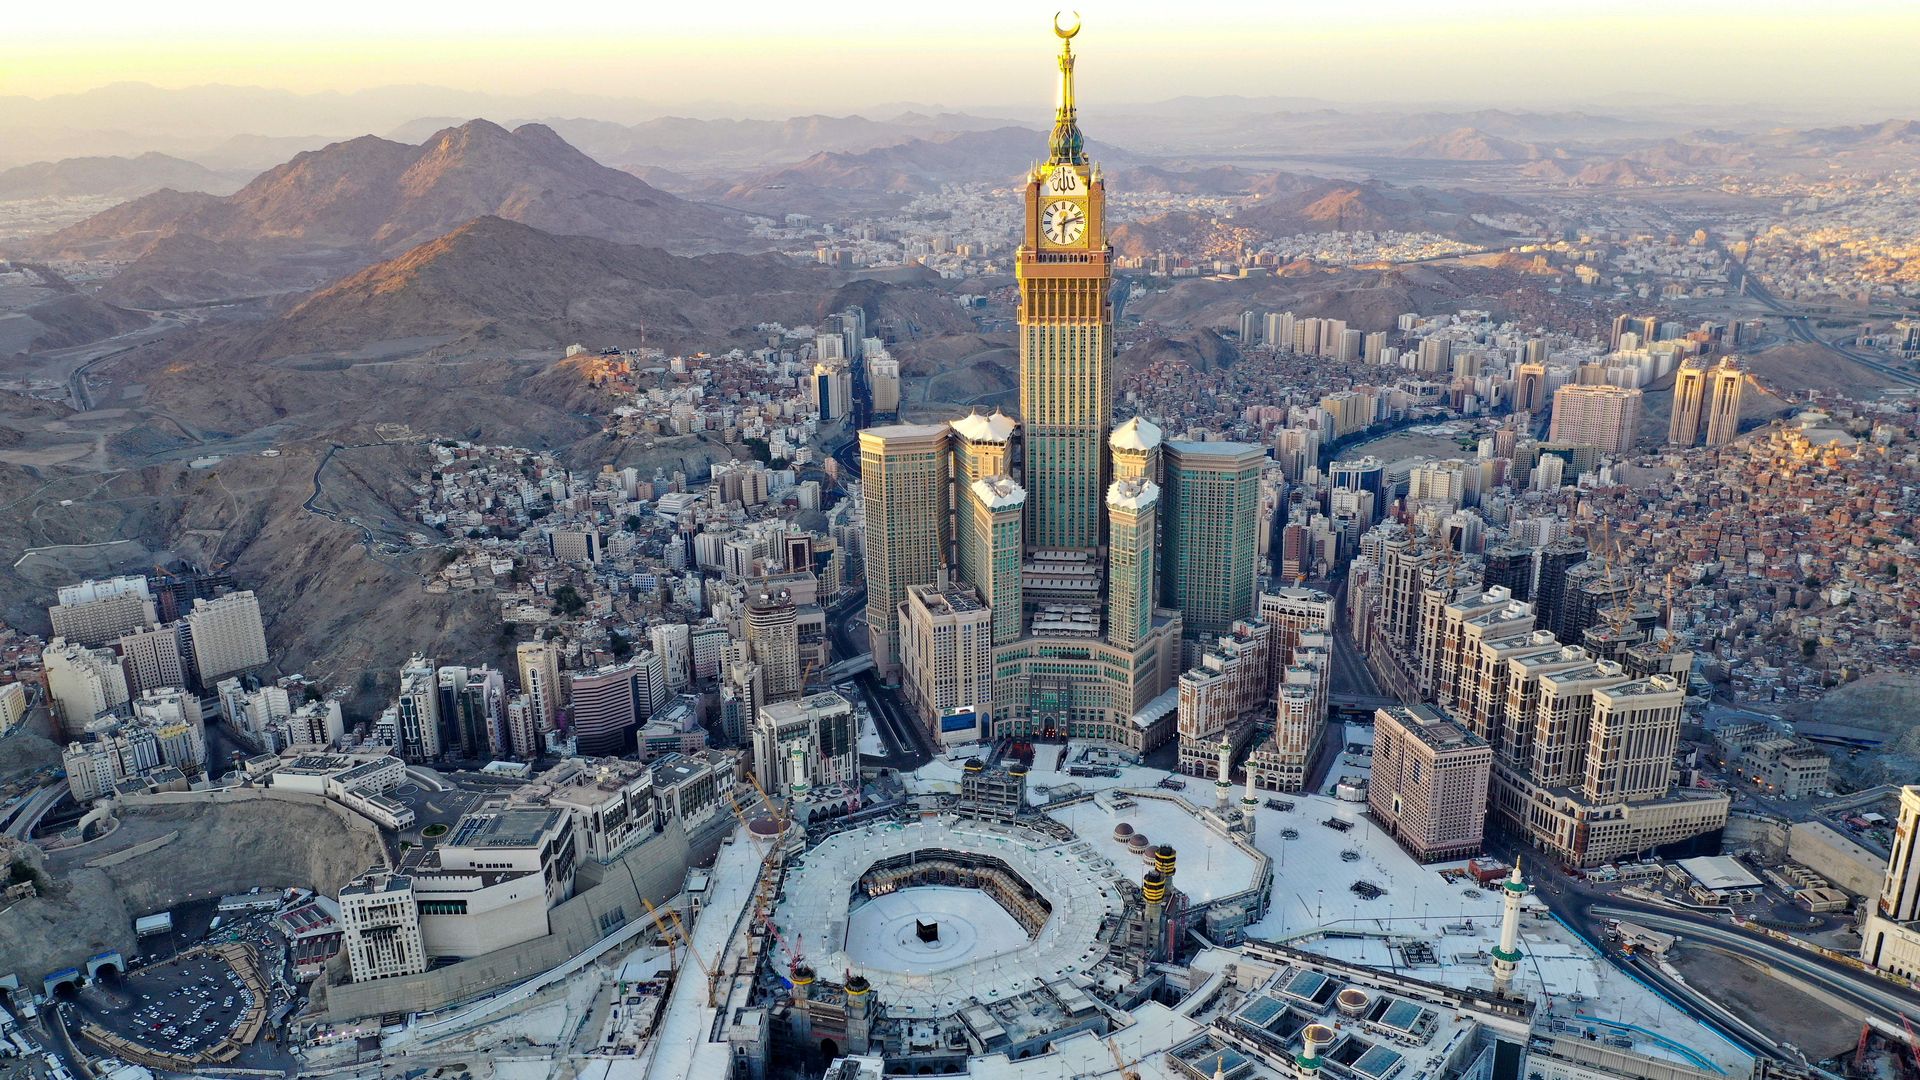 An aerial view shows the Grand Mosque and the Mecca Tower.